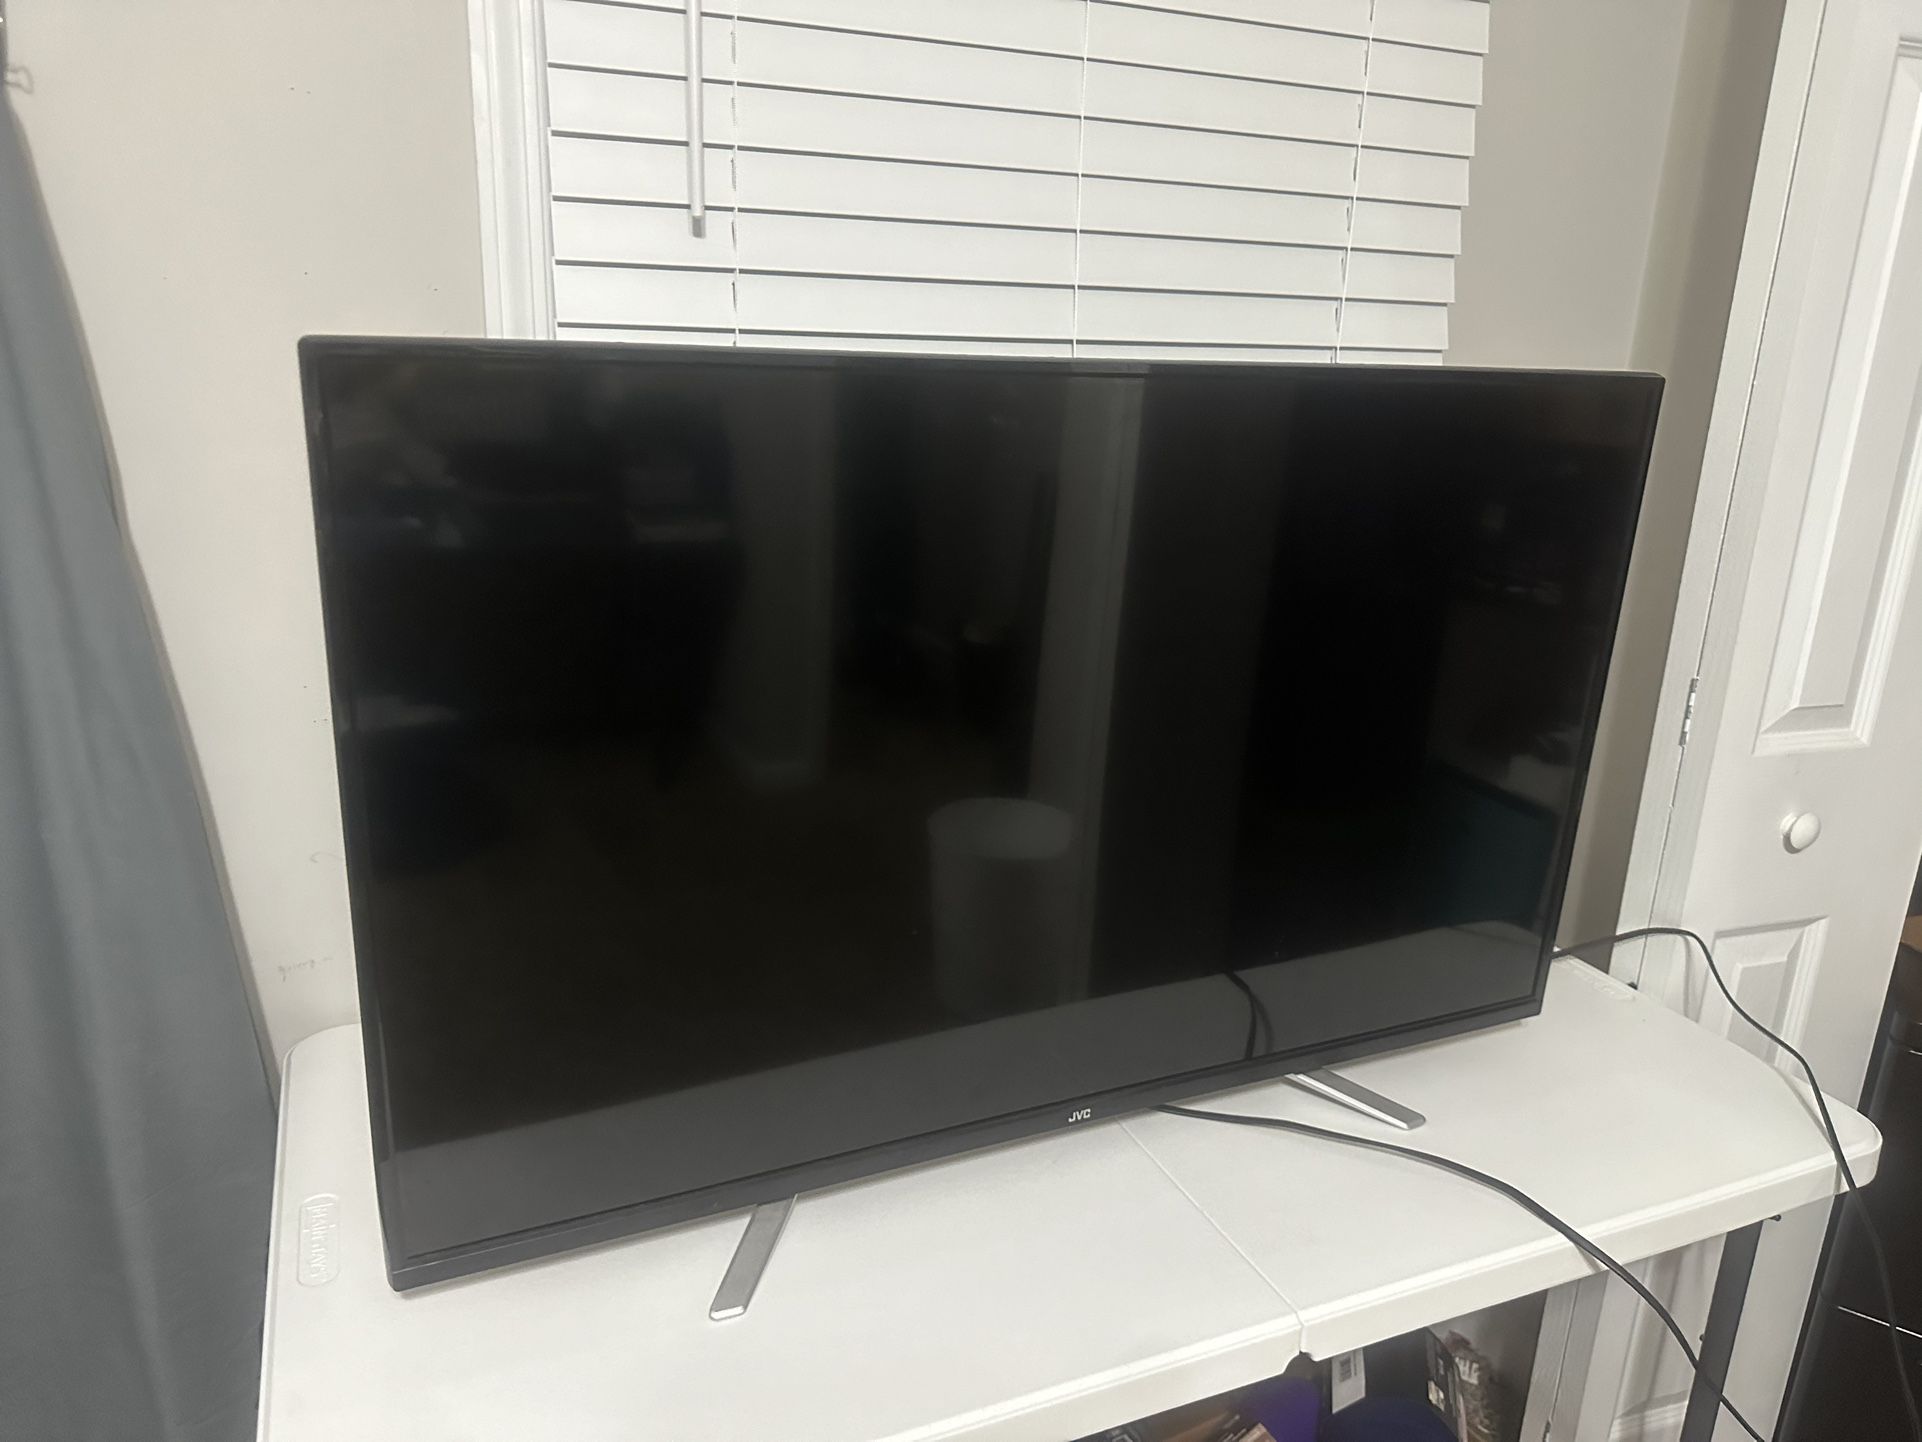 42 Inch Tv. Good Condition 